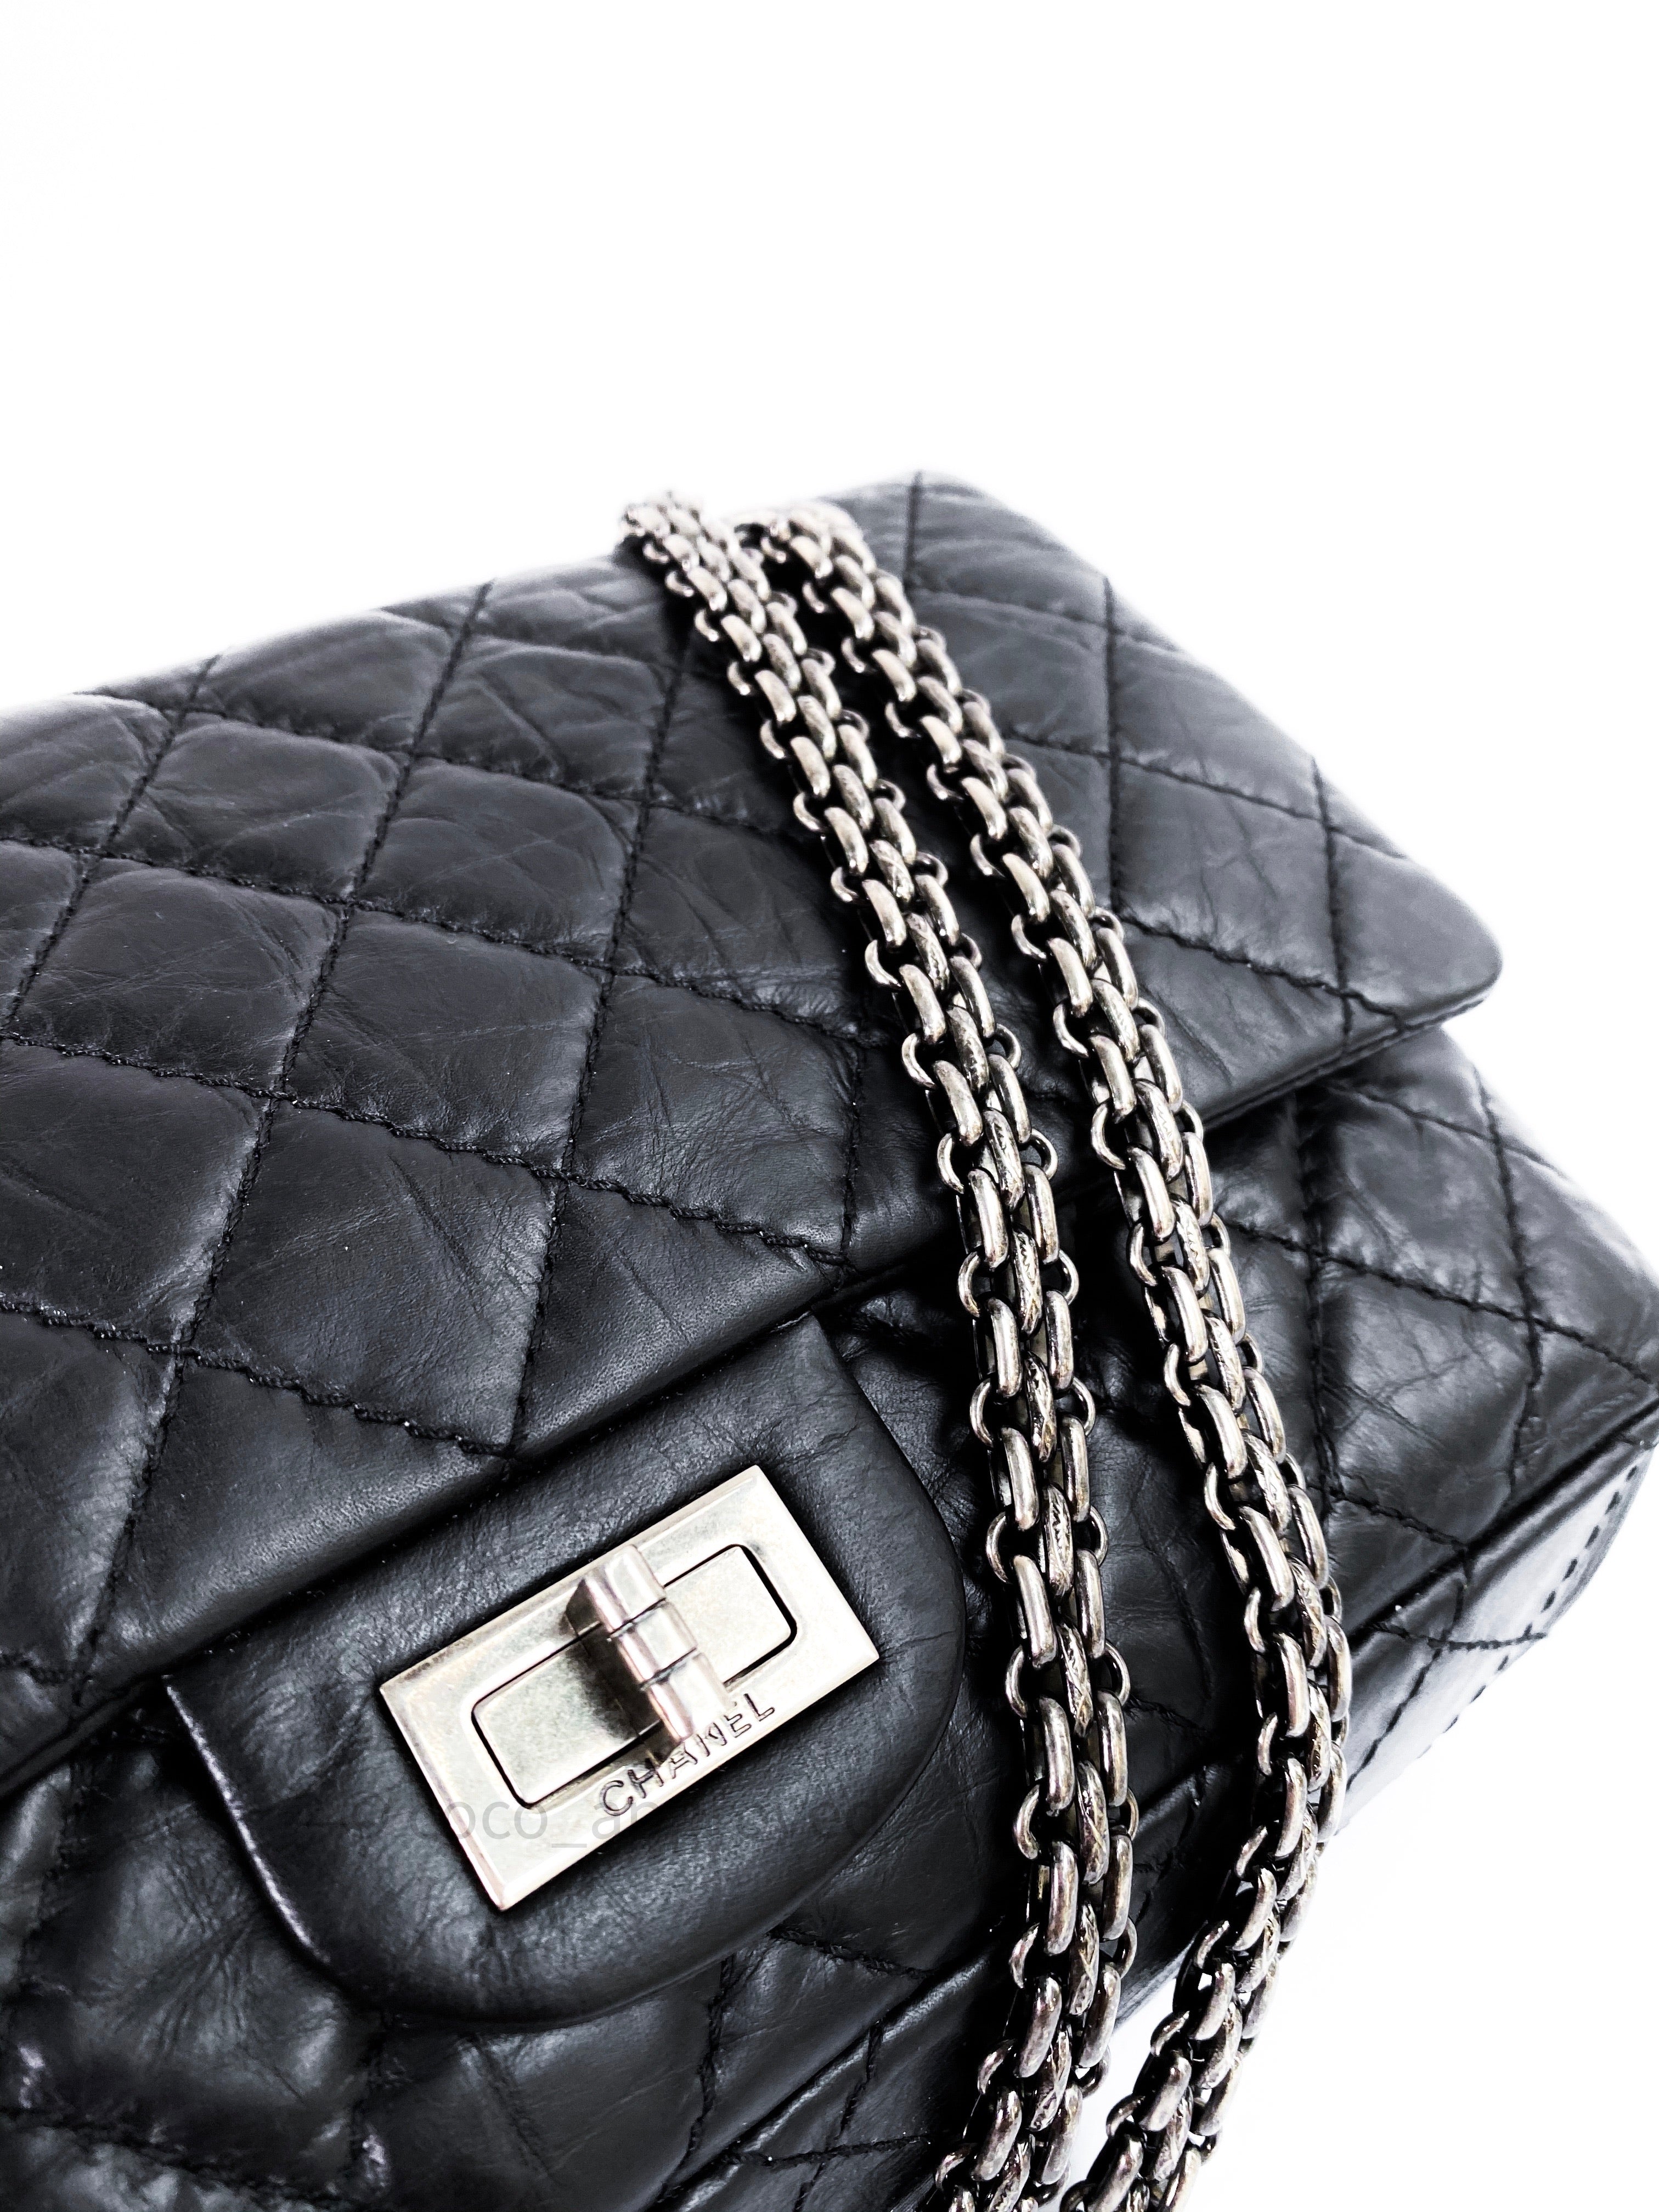 CHANEL Aged Calfskin Chevron Quilted 2.55 Reissue 225 Flap So